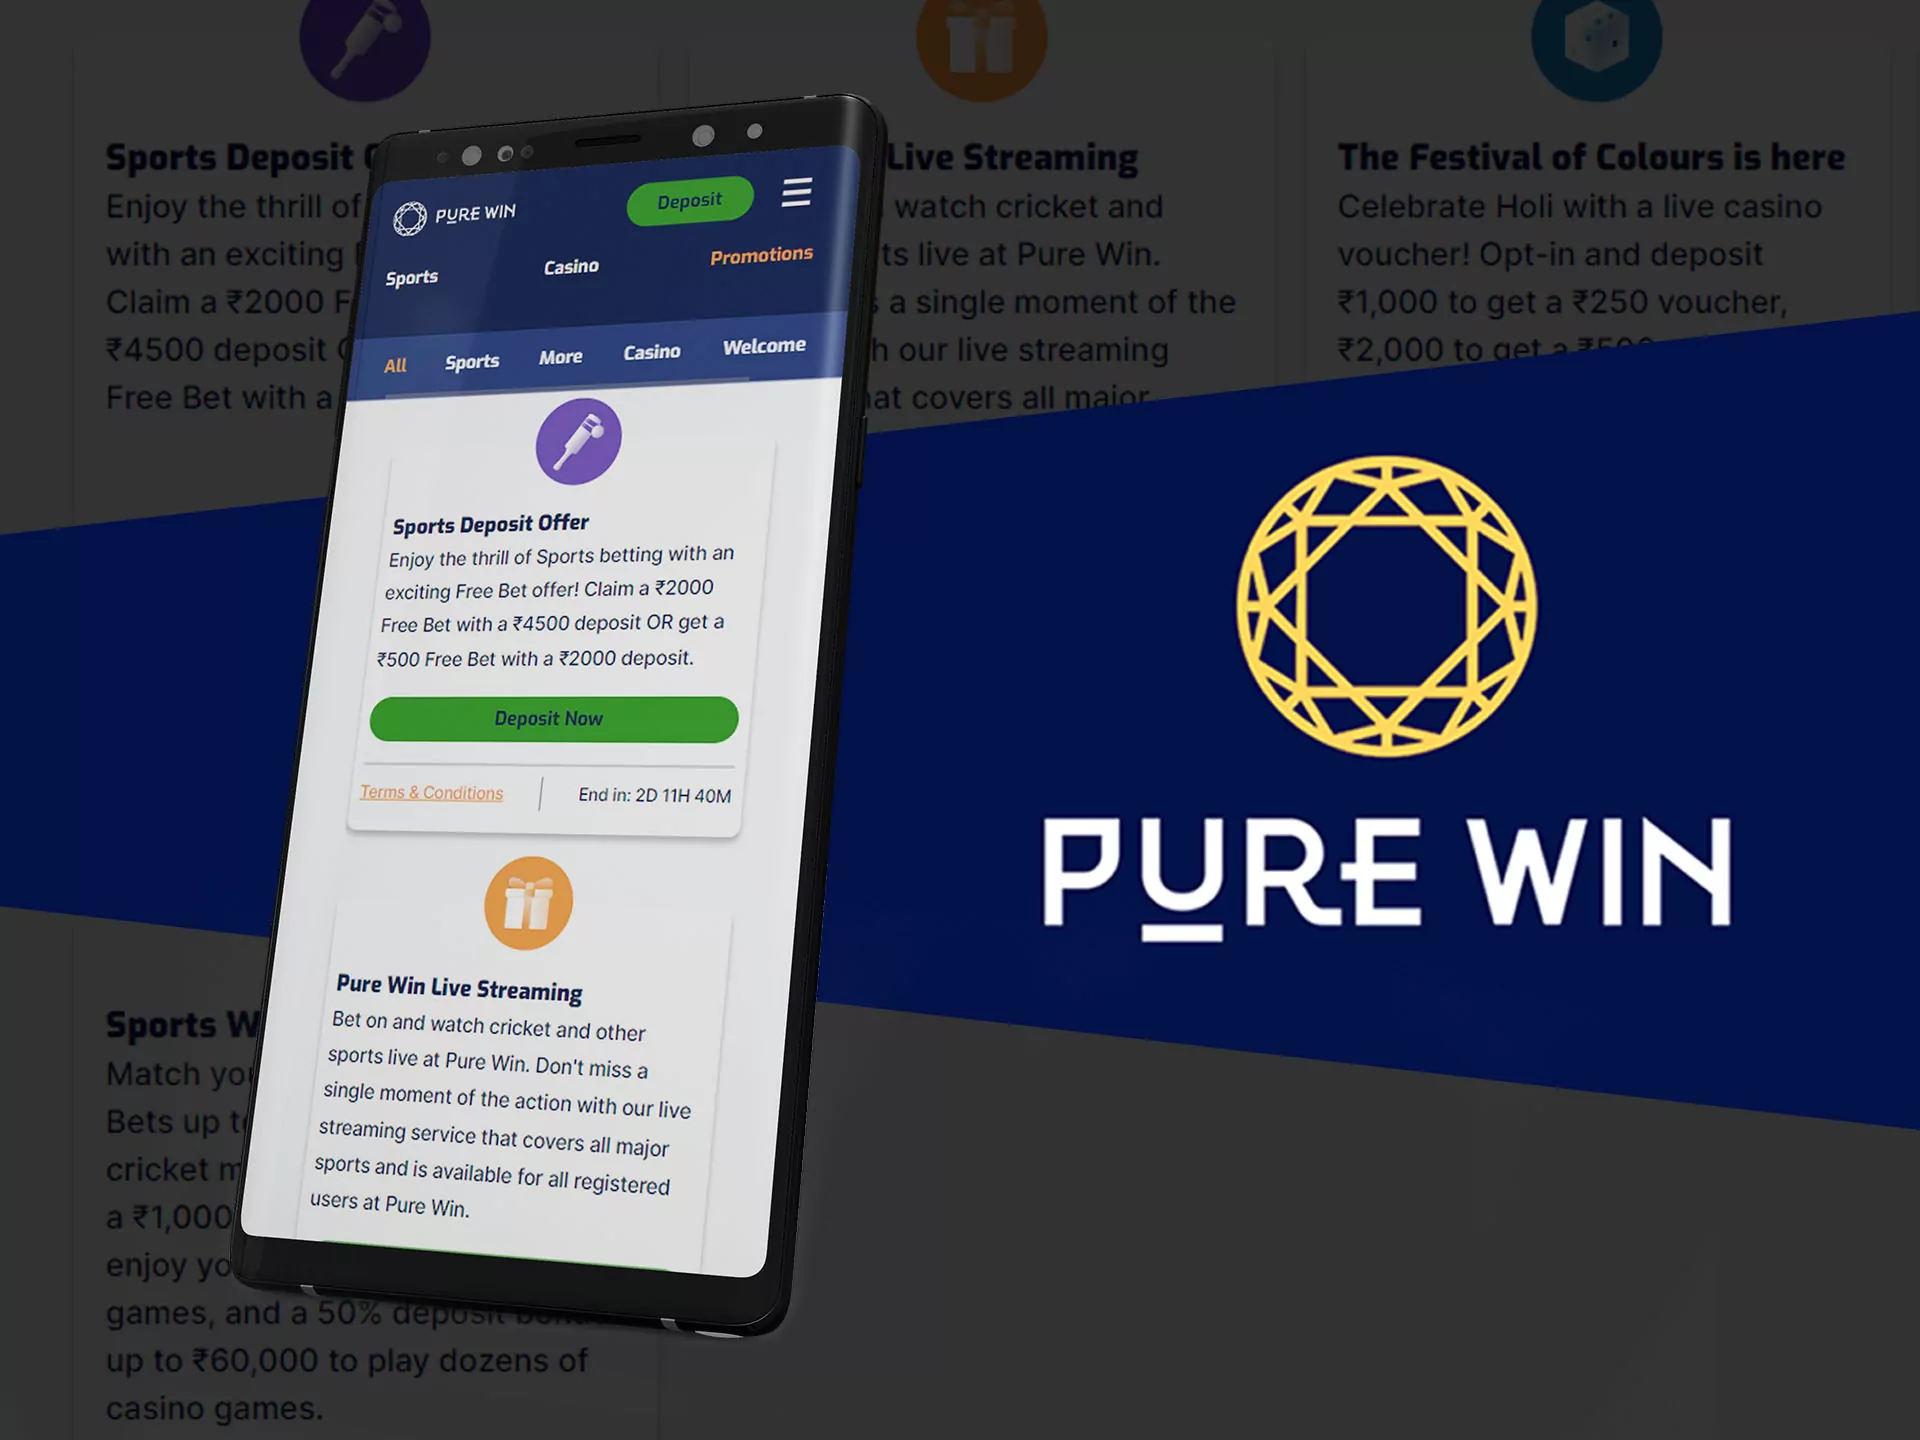 Pure Win have attractive bonuses for betting.